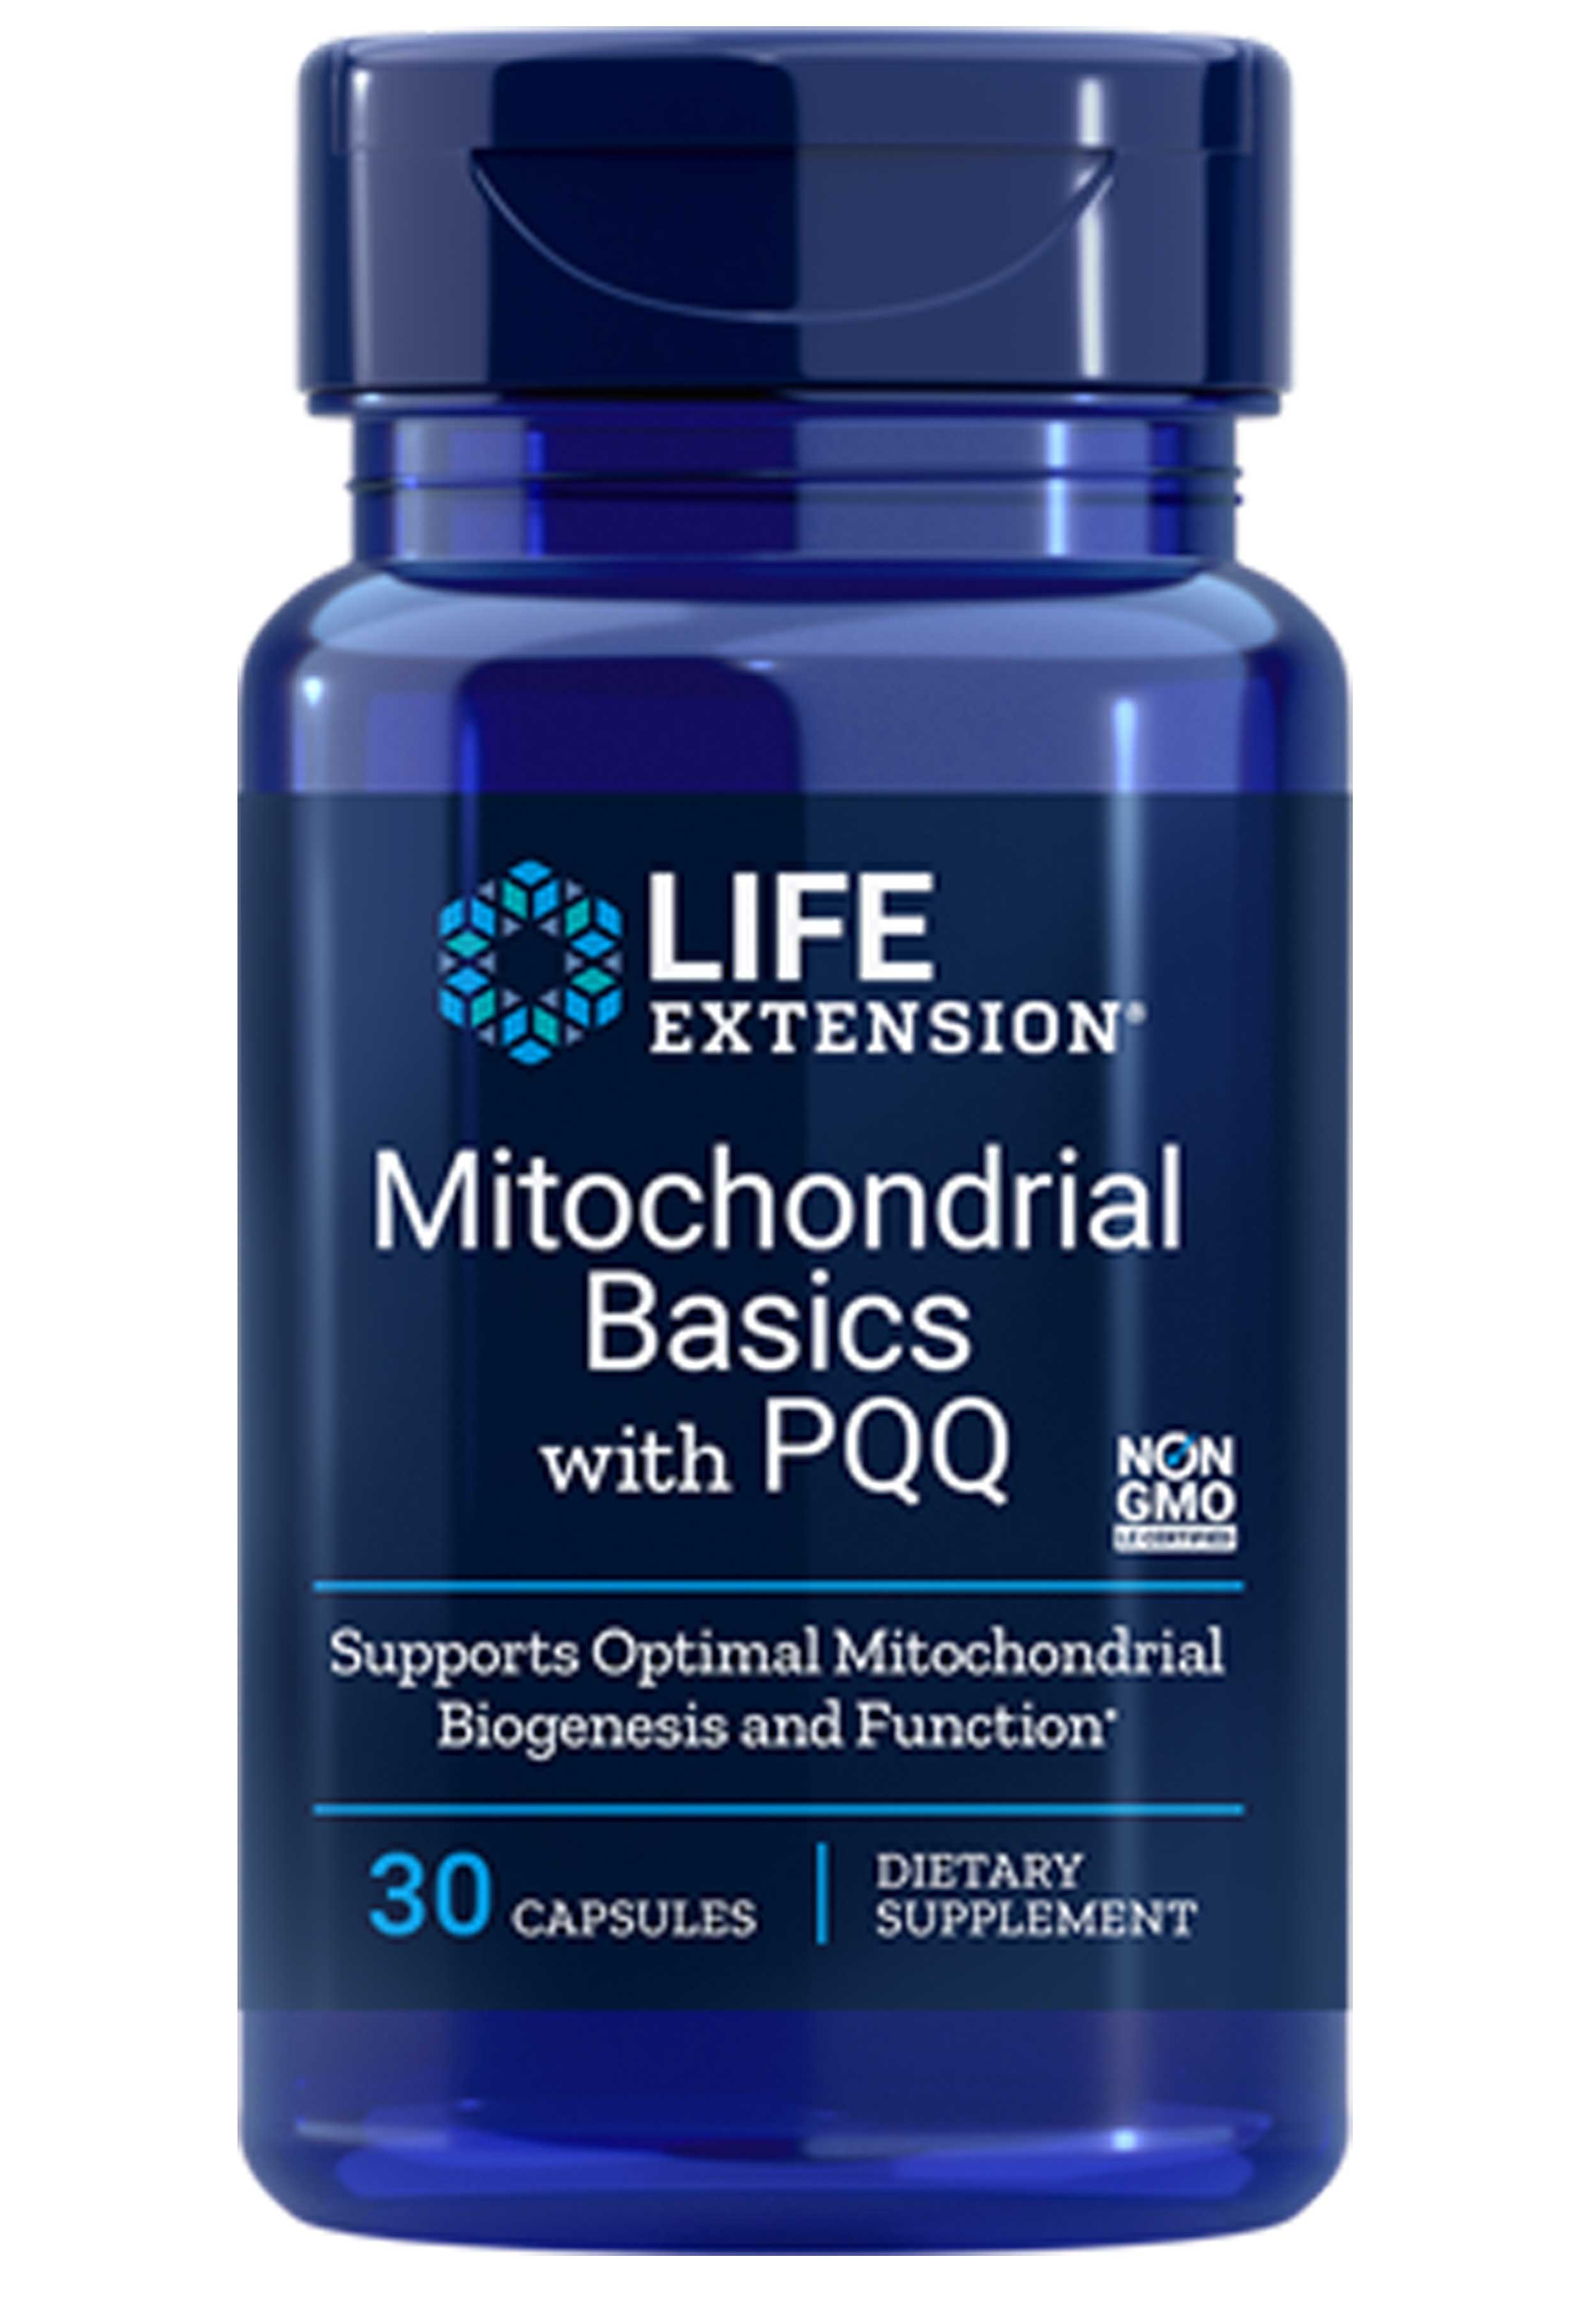 Life Extension Mitochondrial Basics with PQQ